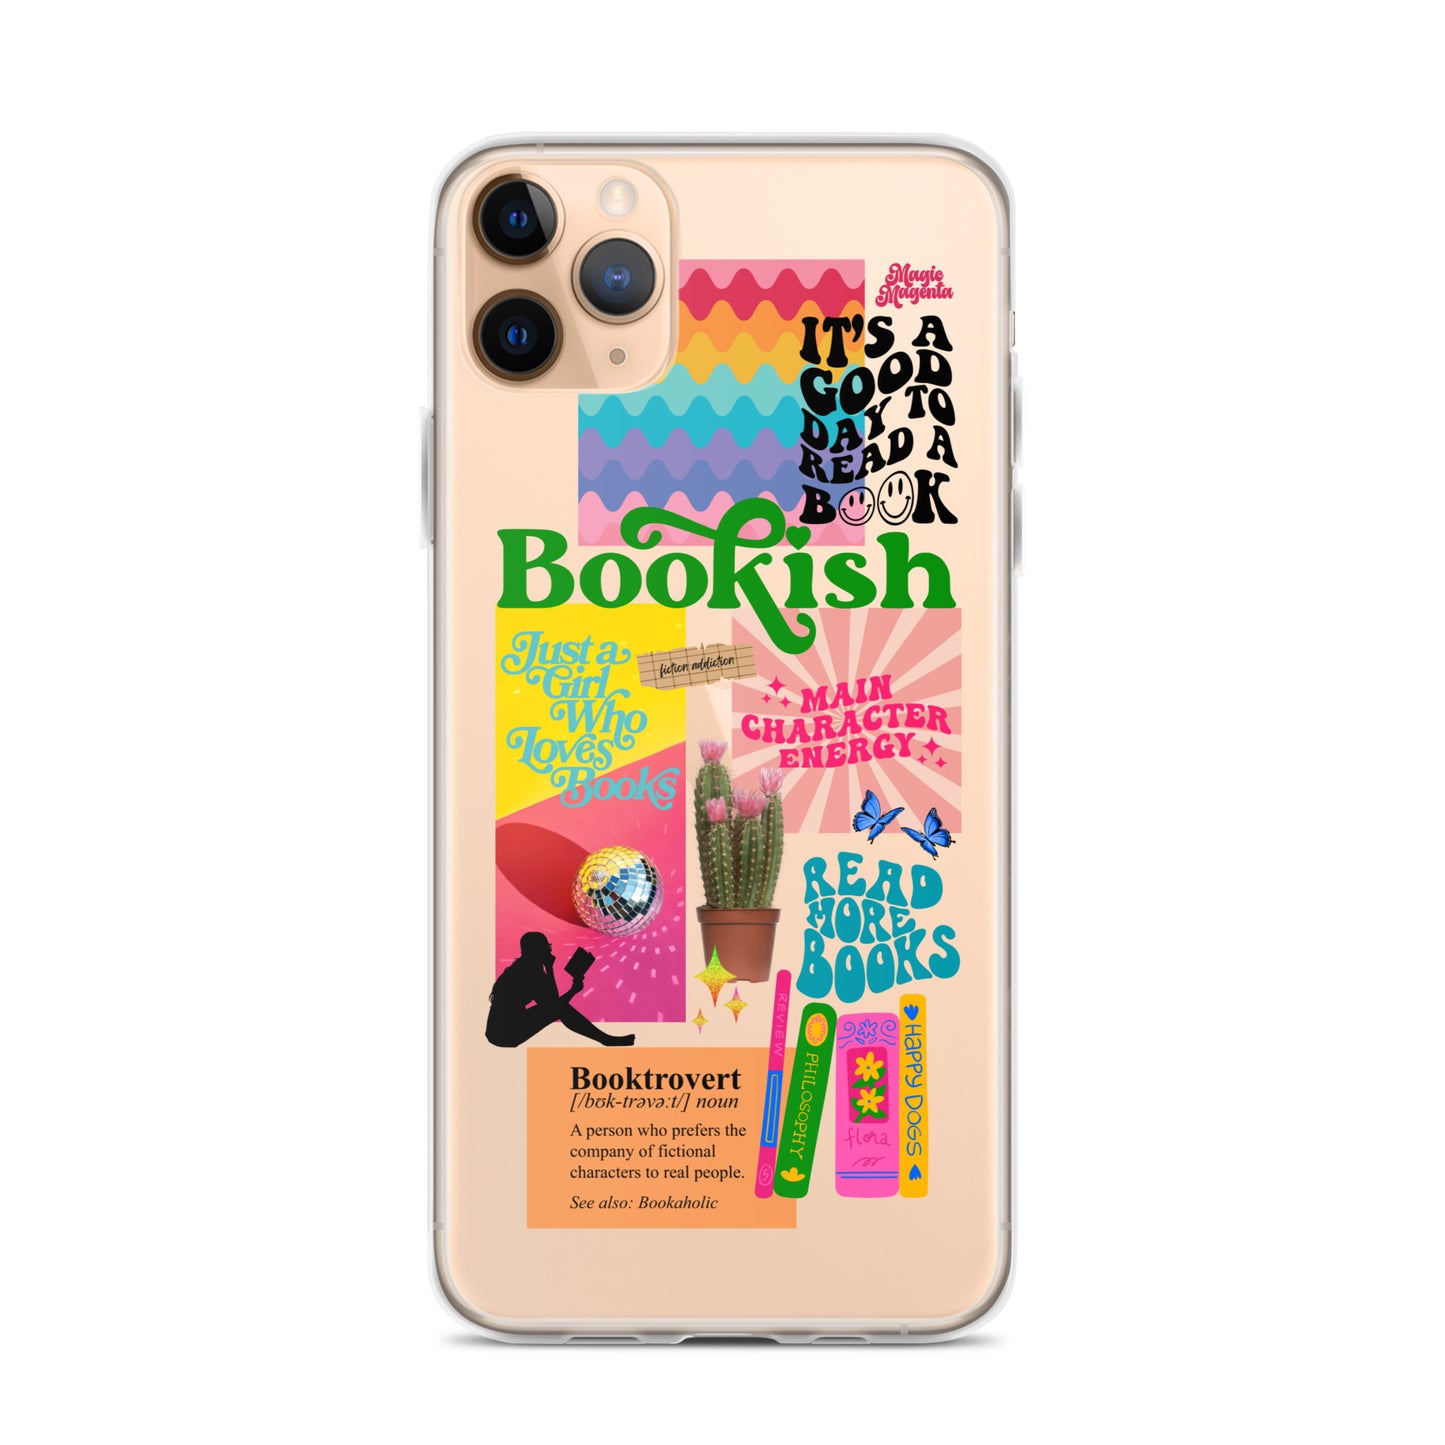 BOOKISH THEMED IPHONE CASE